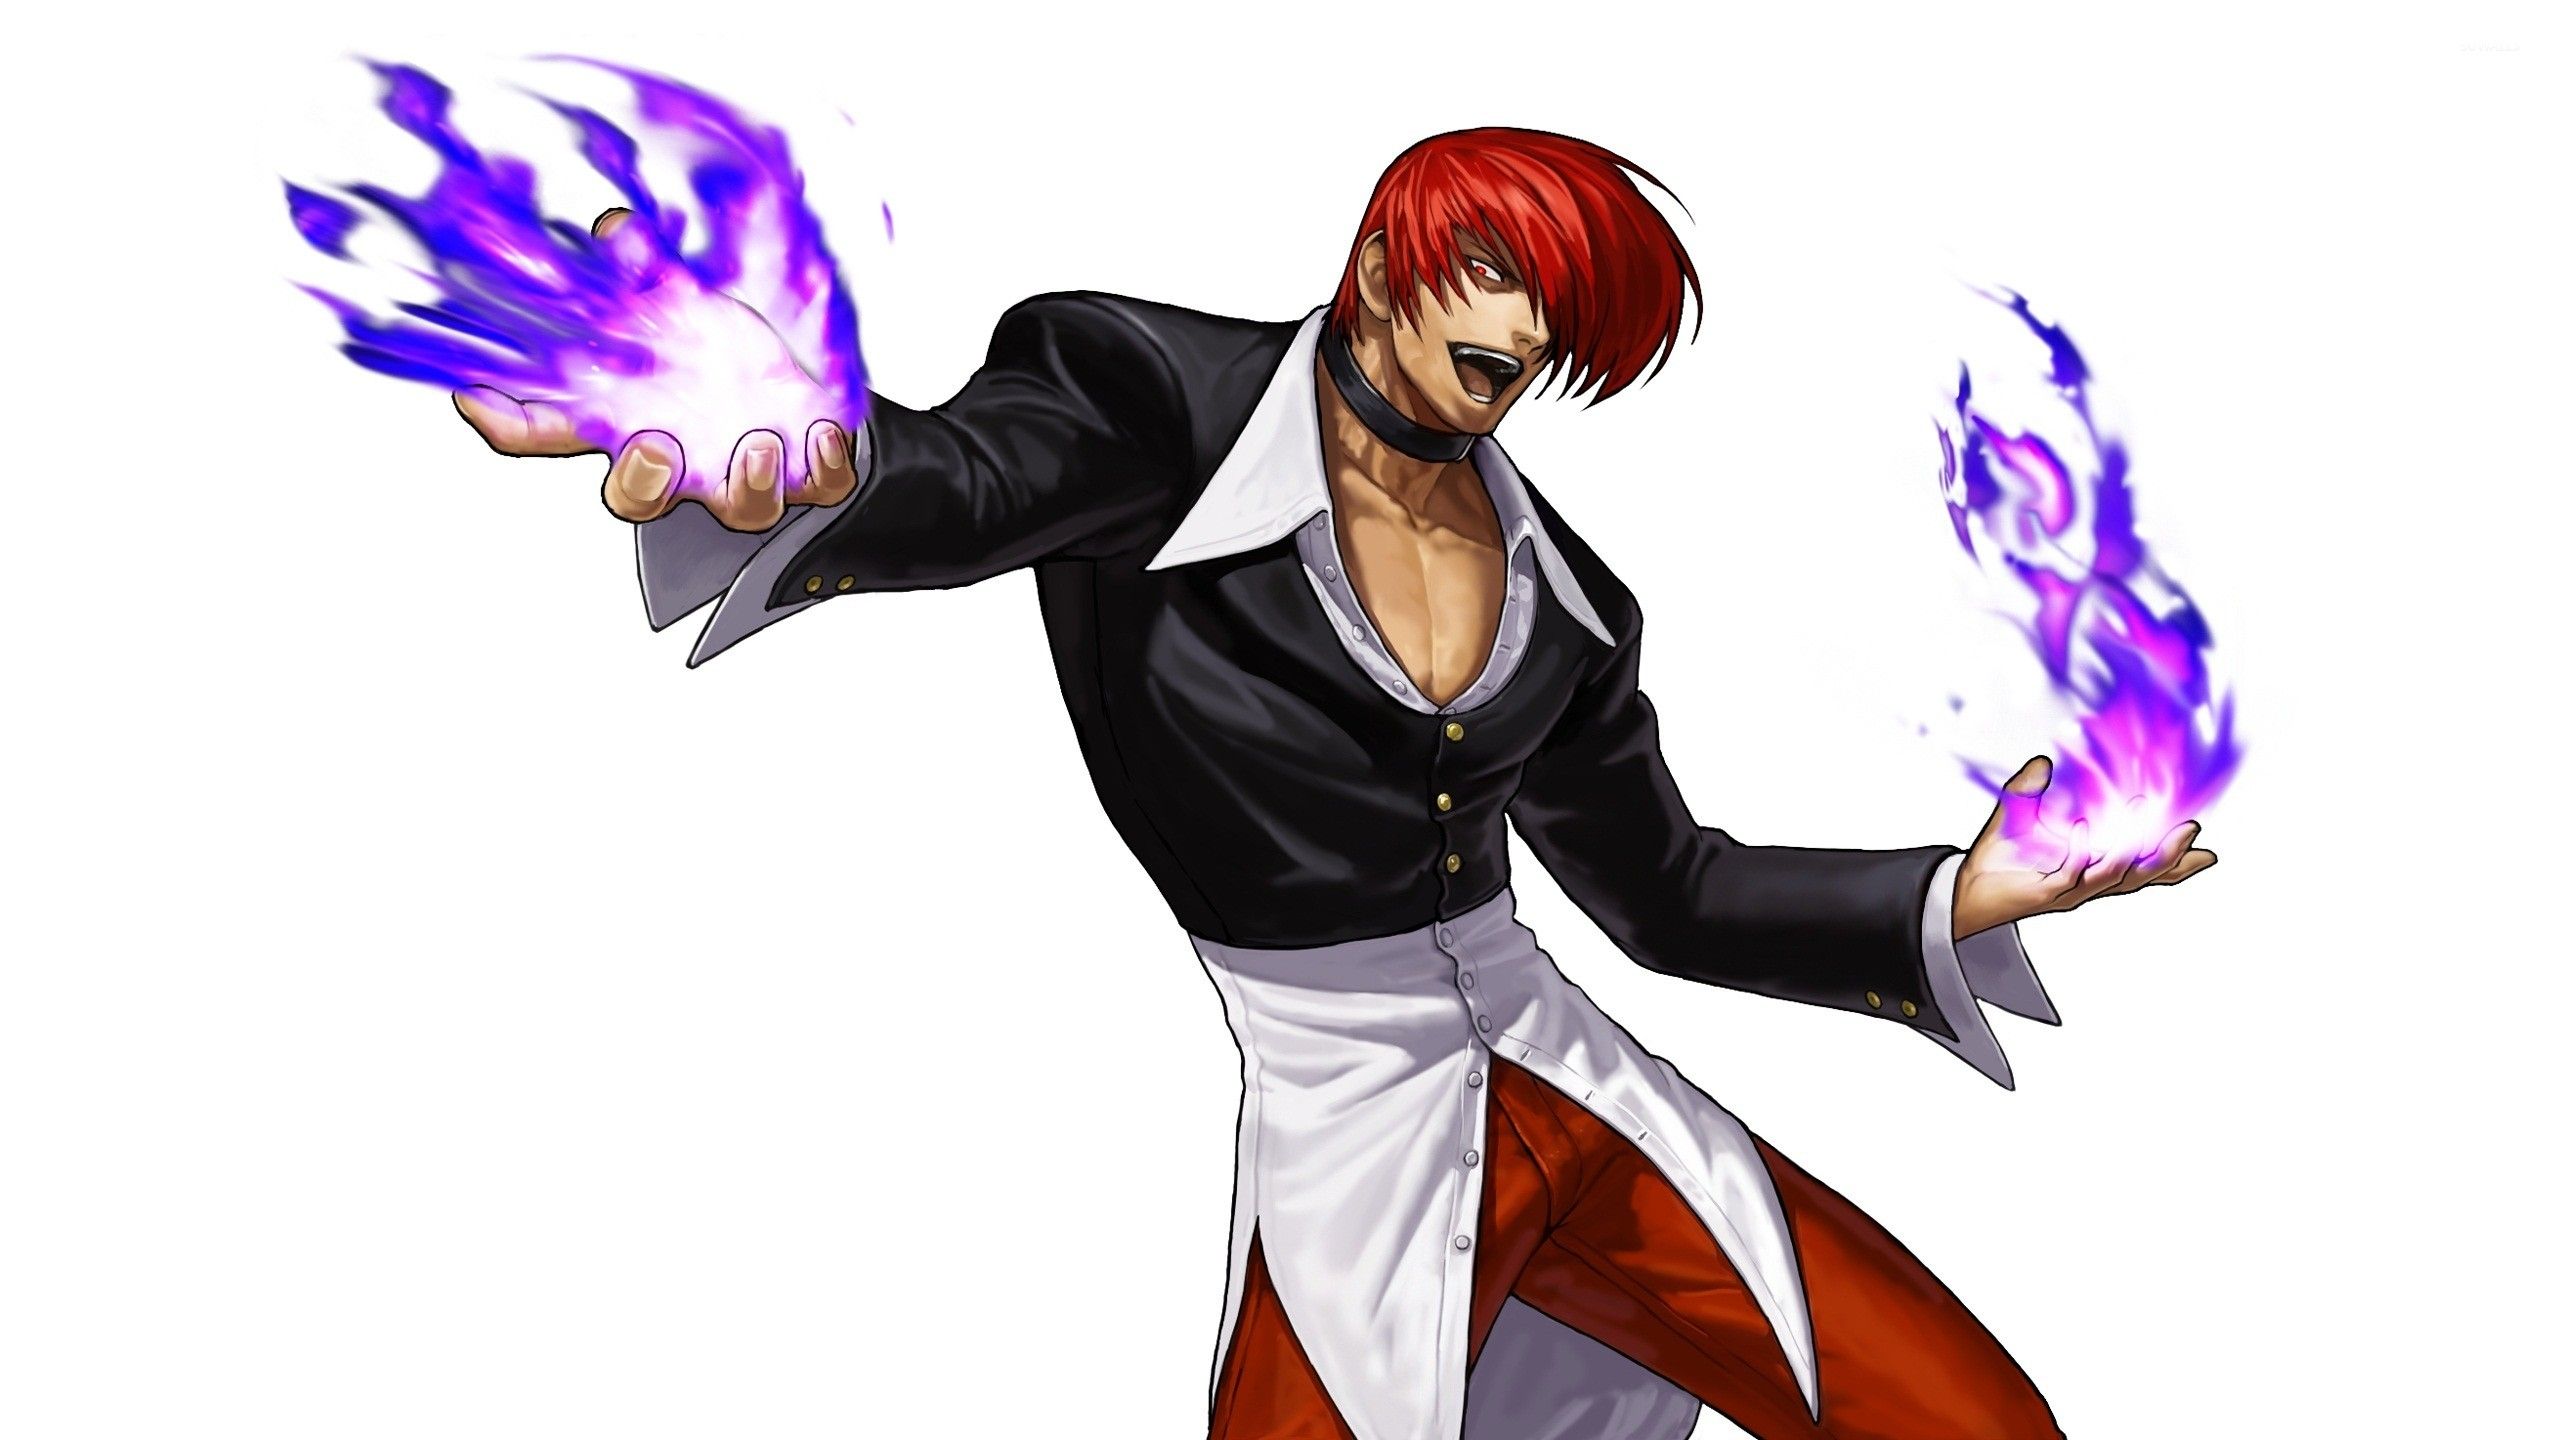 King of Fighters Wallpaper background picture